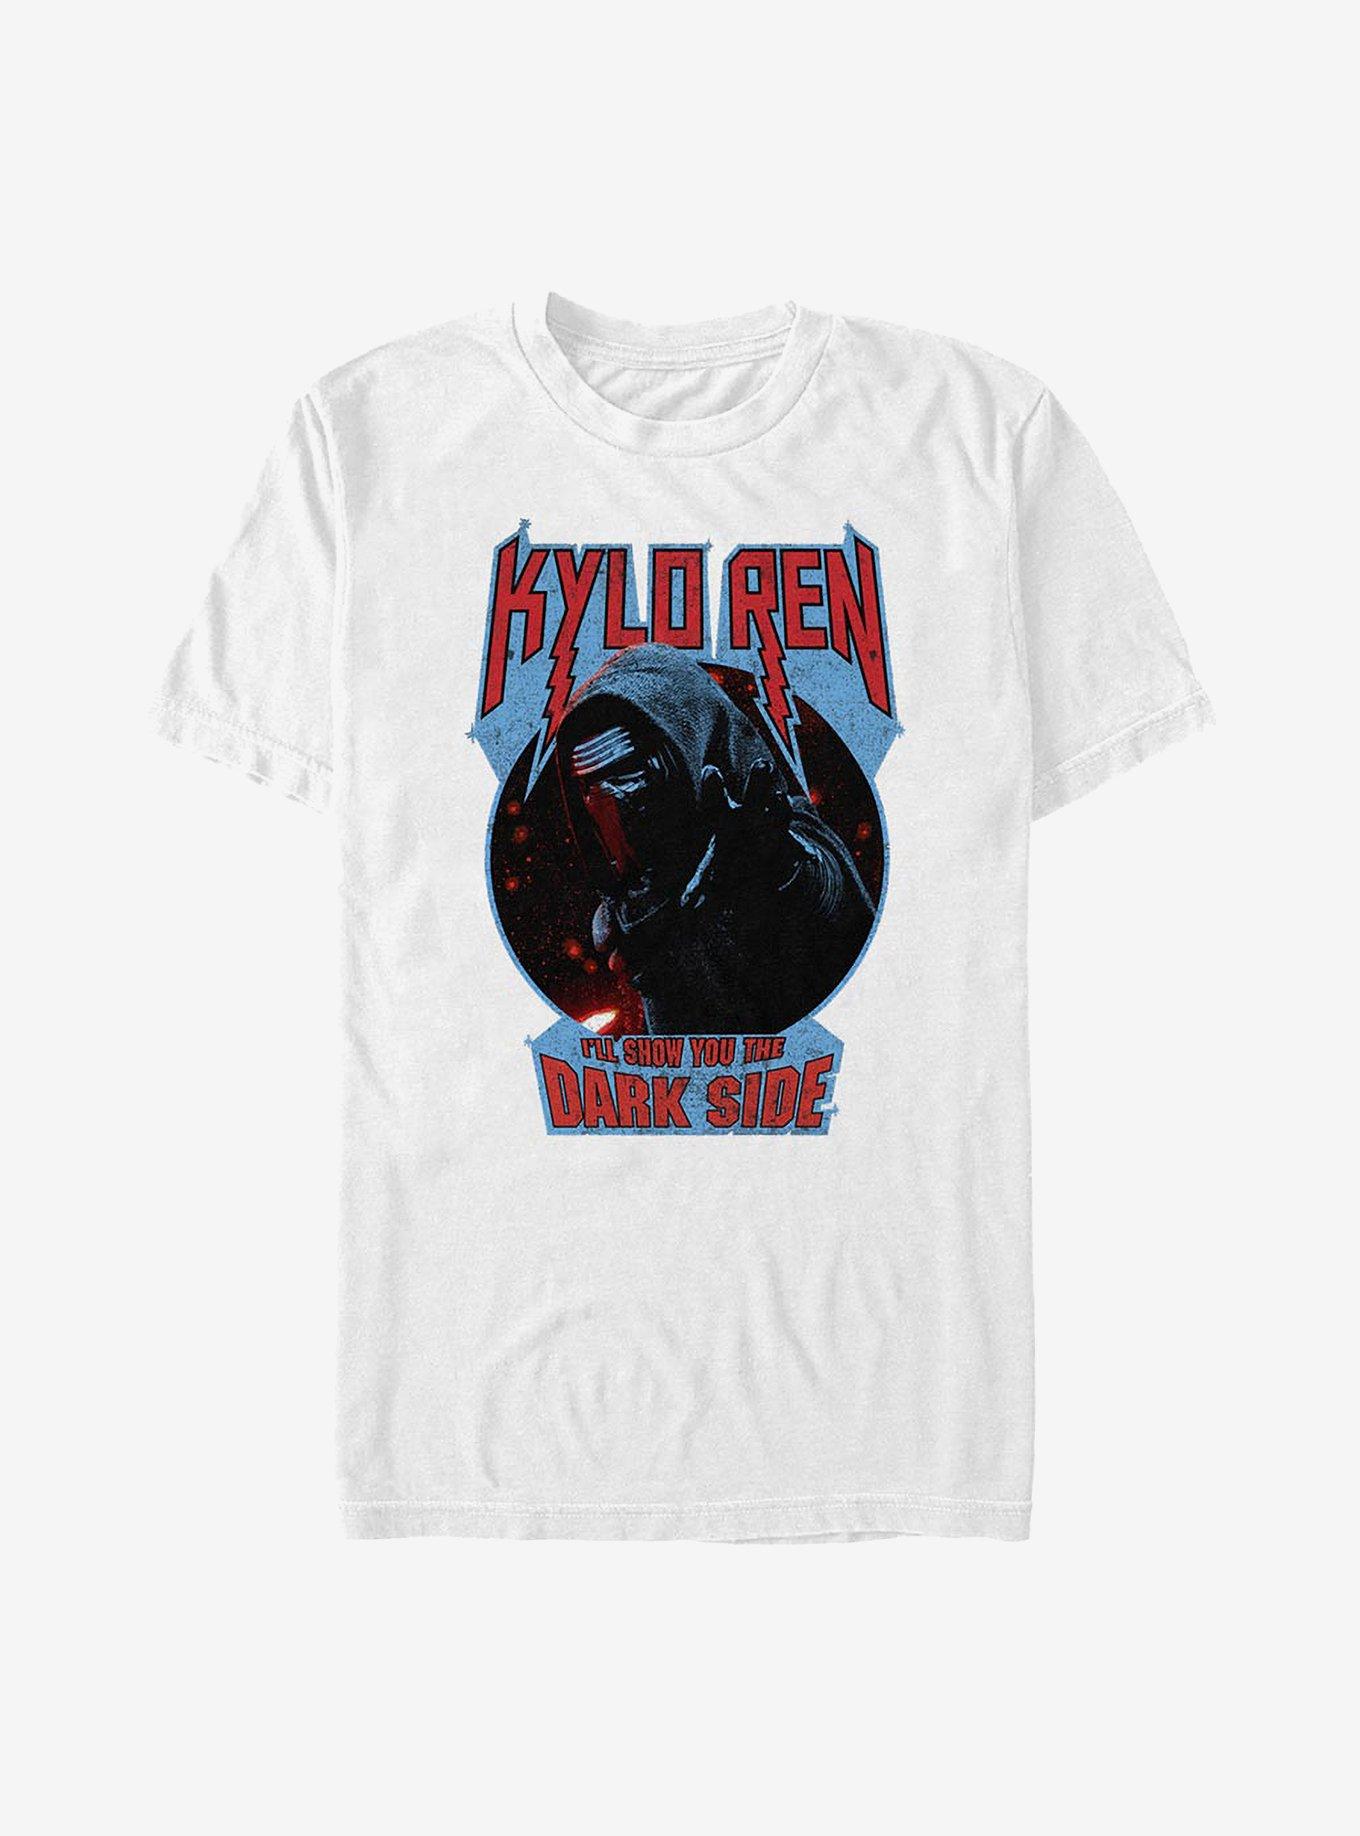 Star Wars: The Force Awakens Kylo Ren Show You The Dark Side T-Shirt, WHITE, hi-res